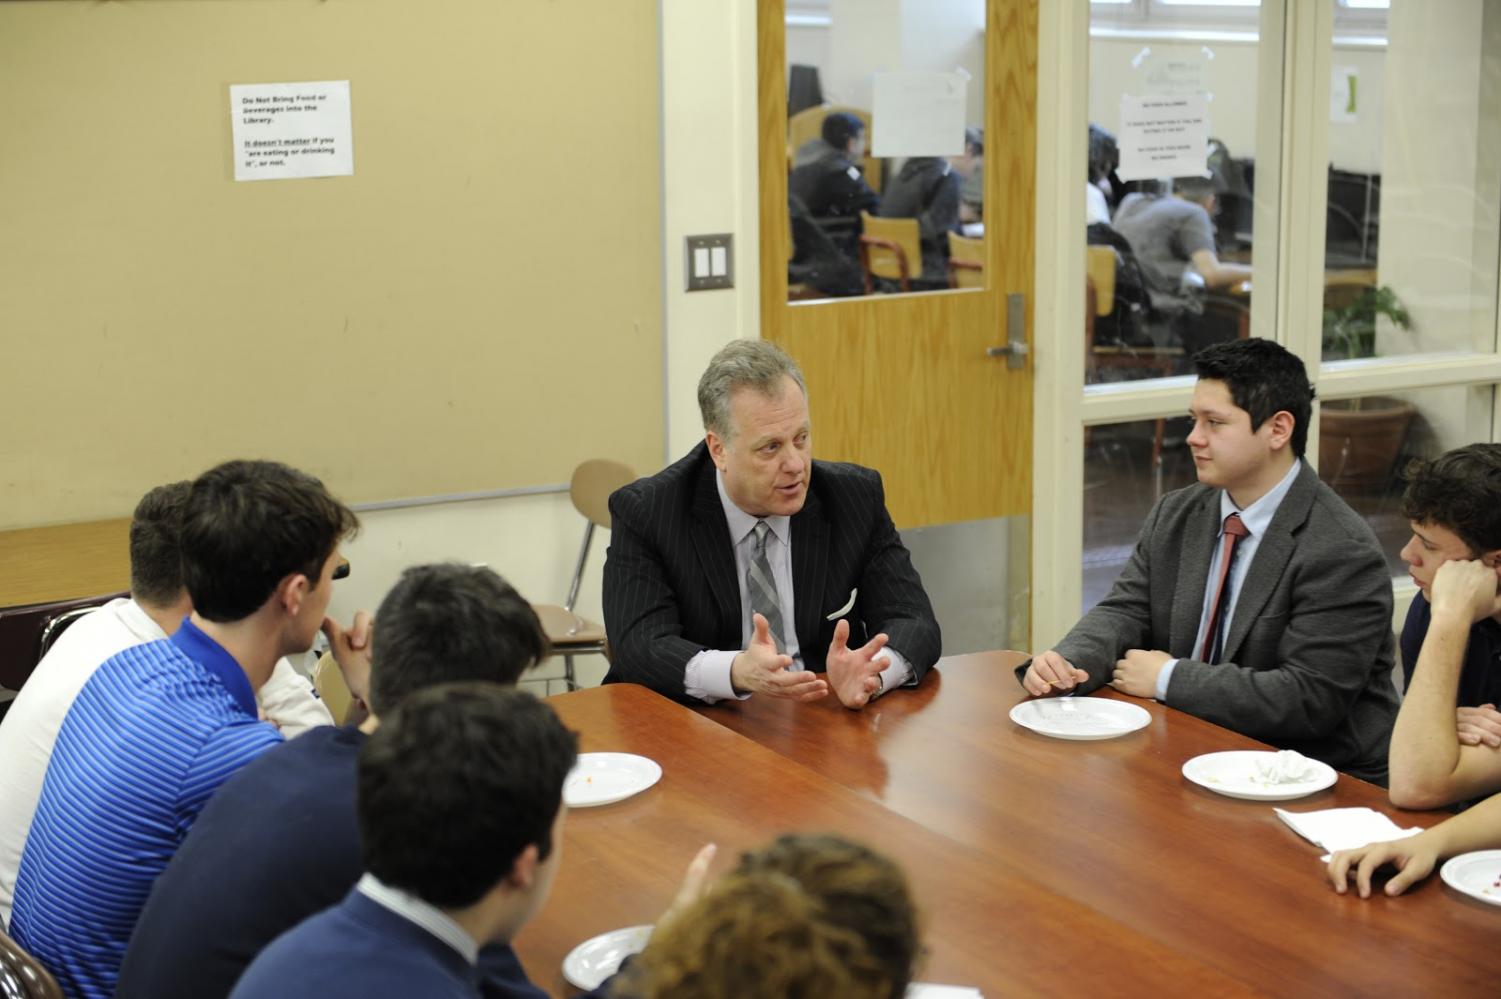 Michael Kay speaks to students about his experiences at Bronx Science during a luncheon.